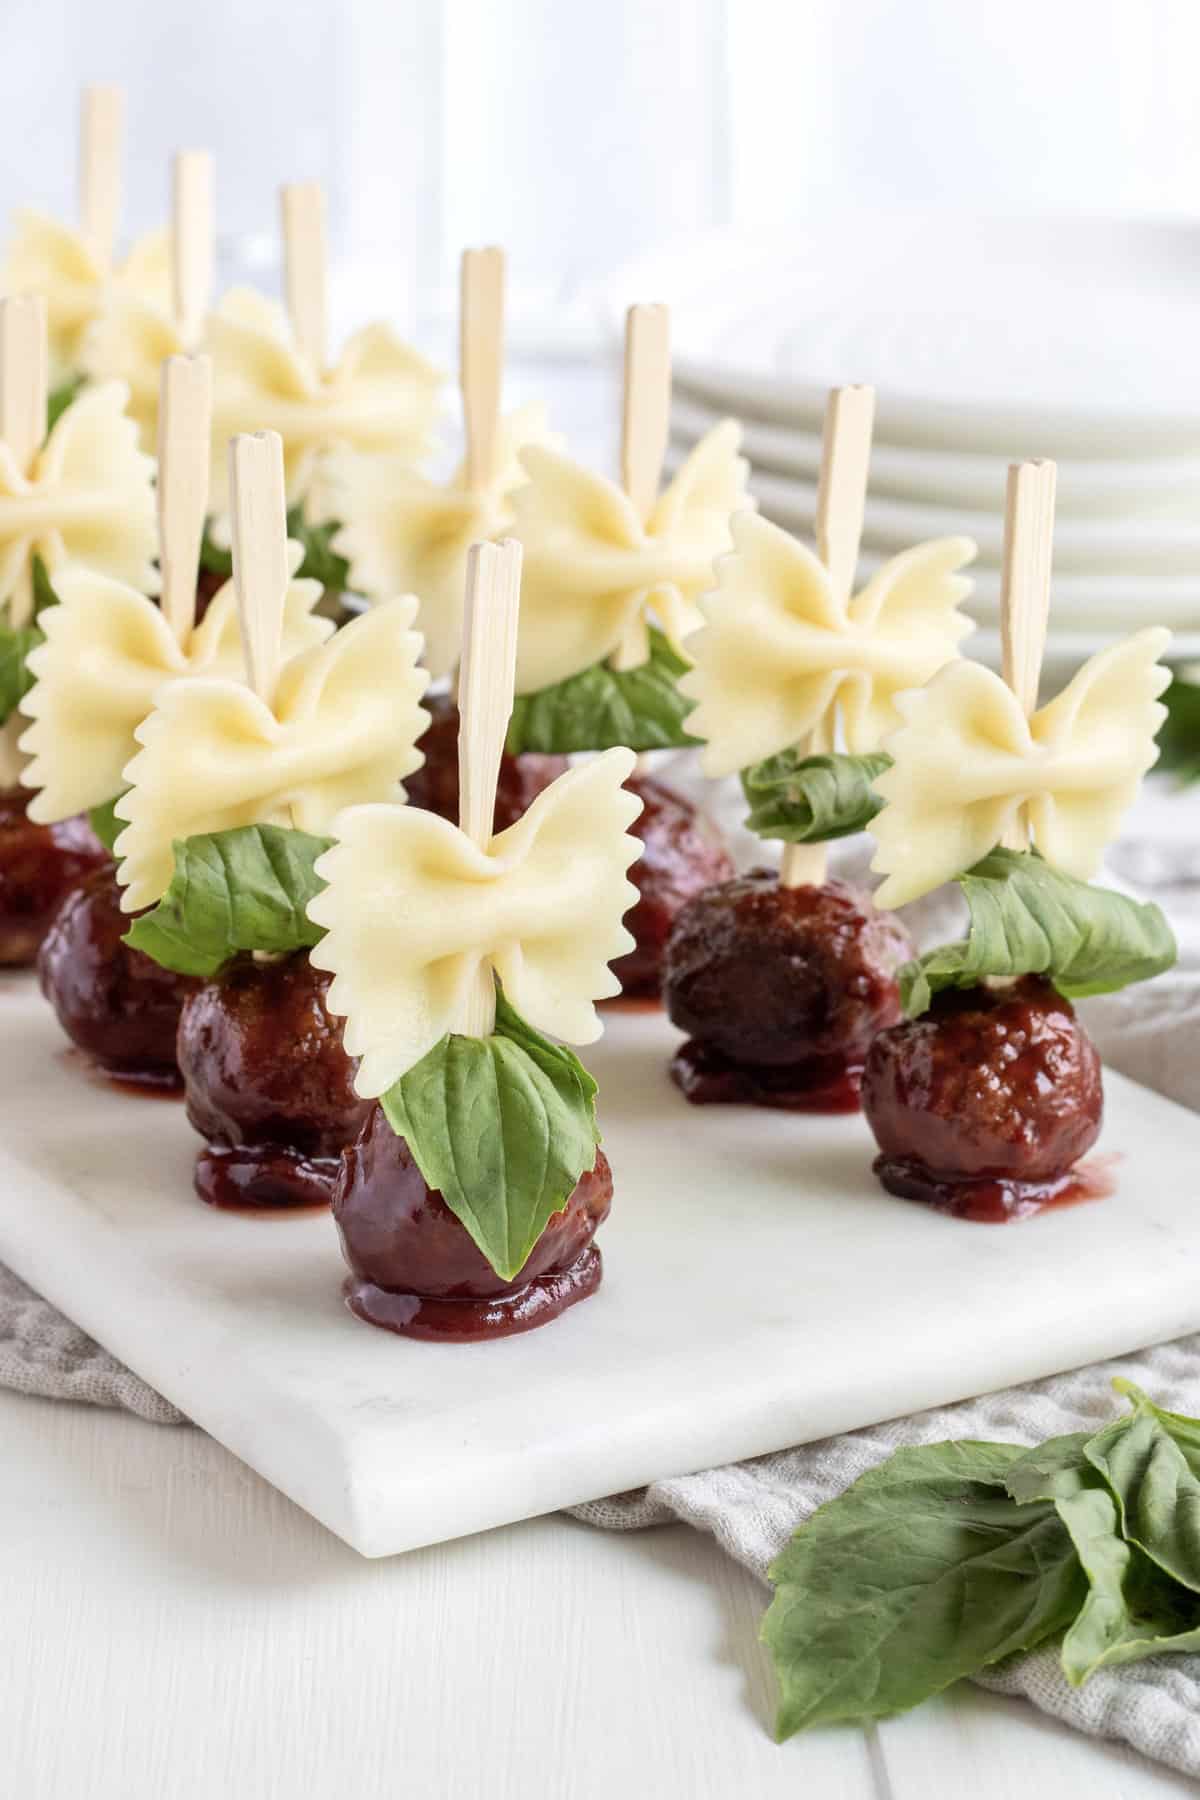 12 wooden skewers of bowtie pasta and meatballs on a white marble serving plate.